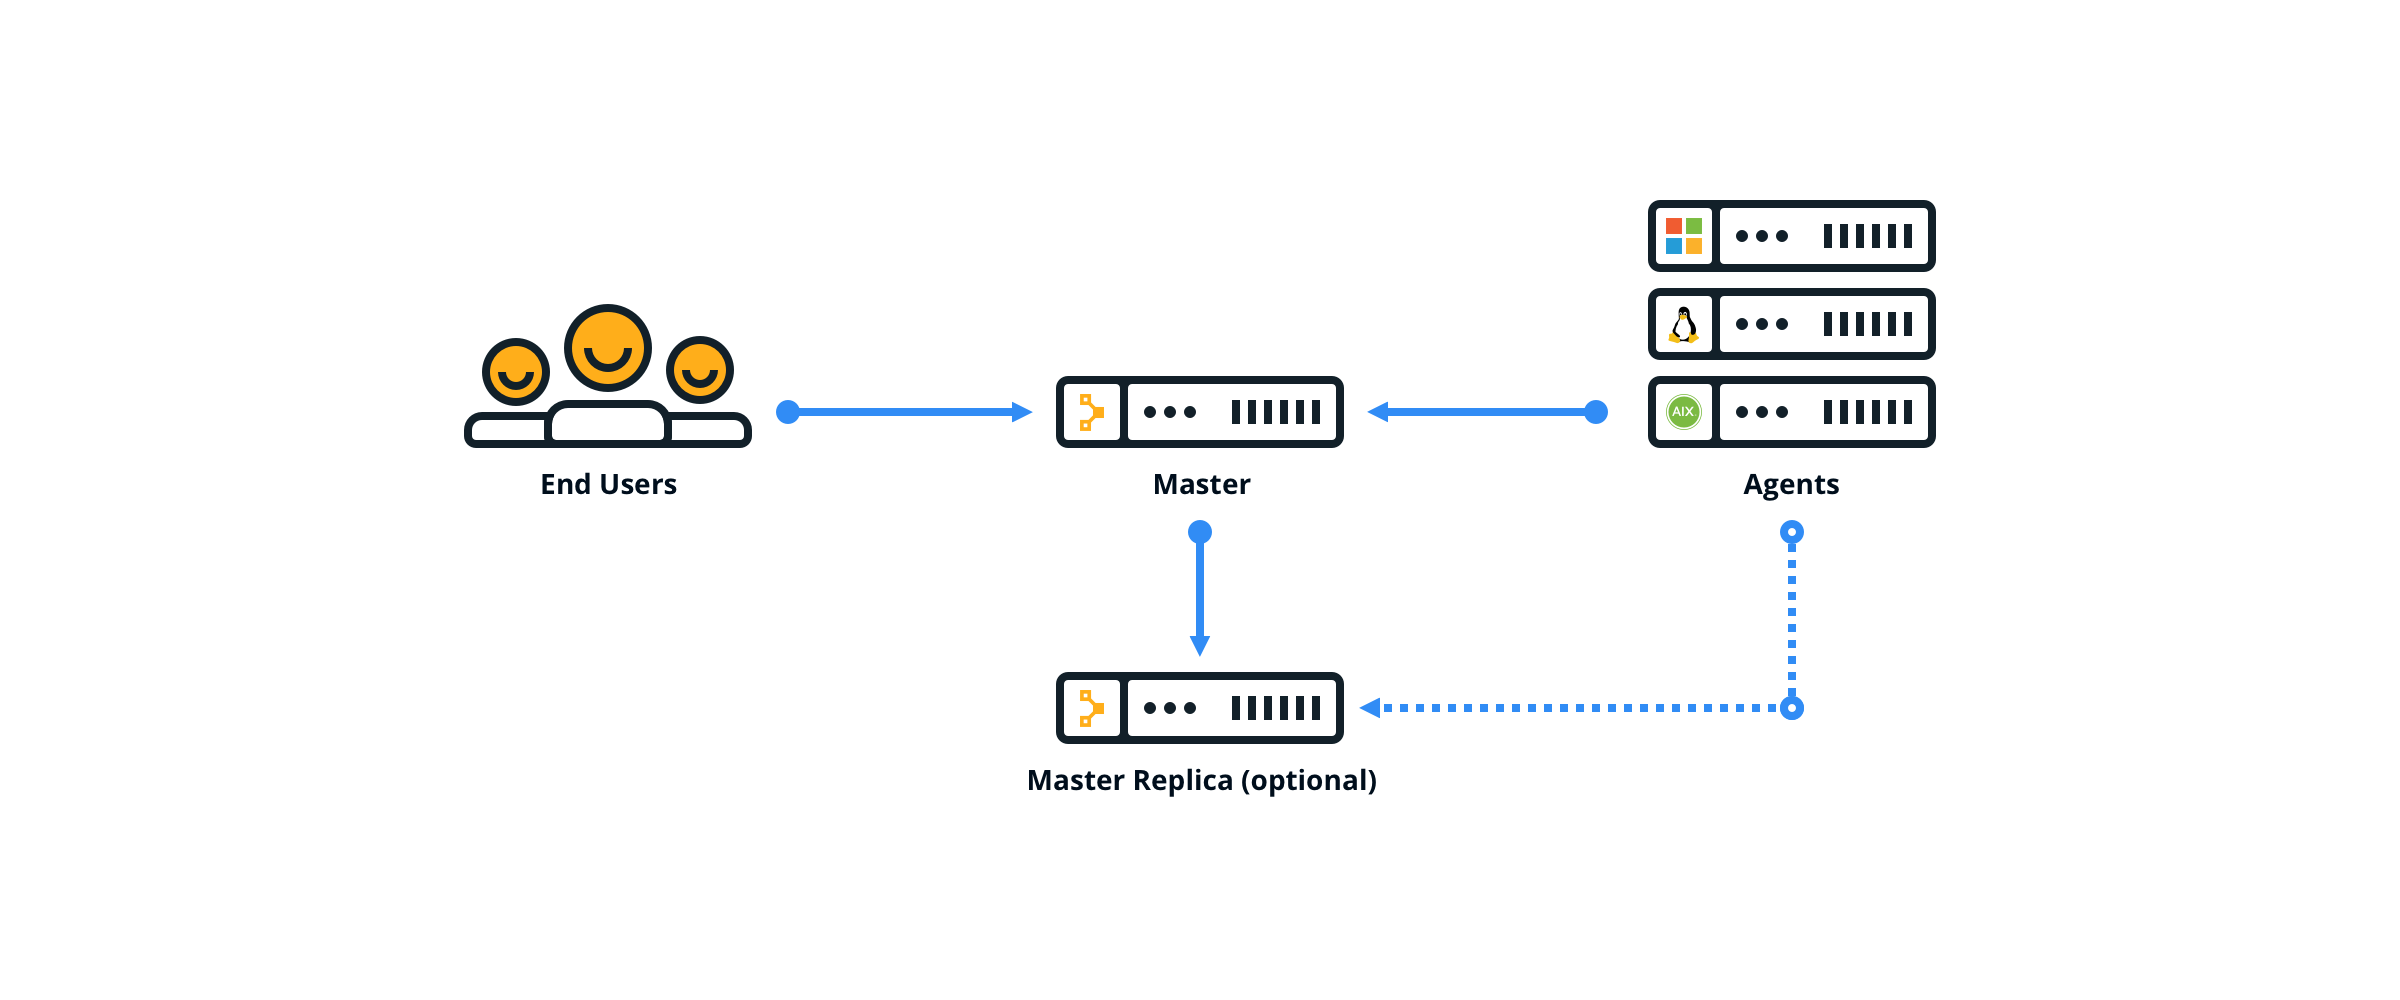 Graphic showing the standard reference architecture, where end users interact with a single master, and the master interacts with multiple agents.